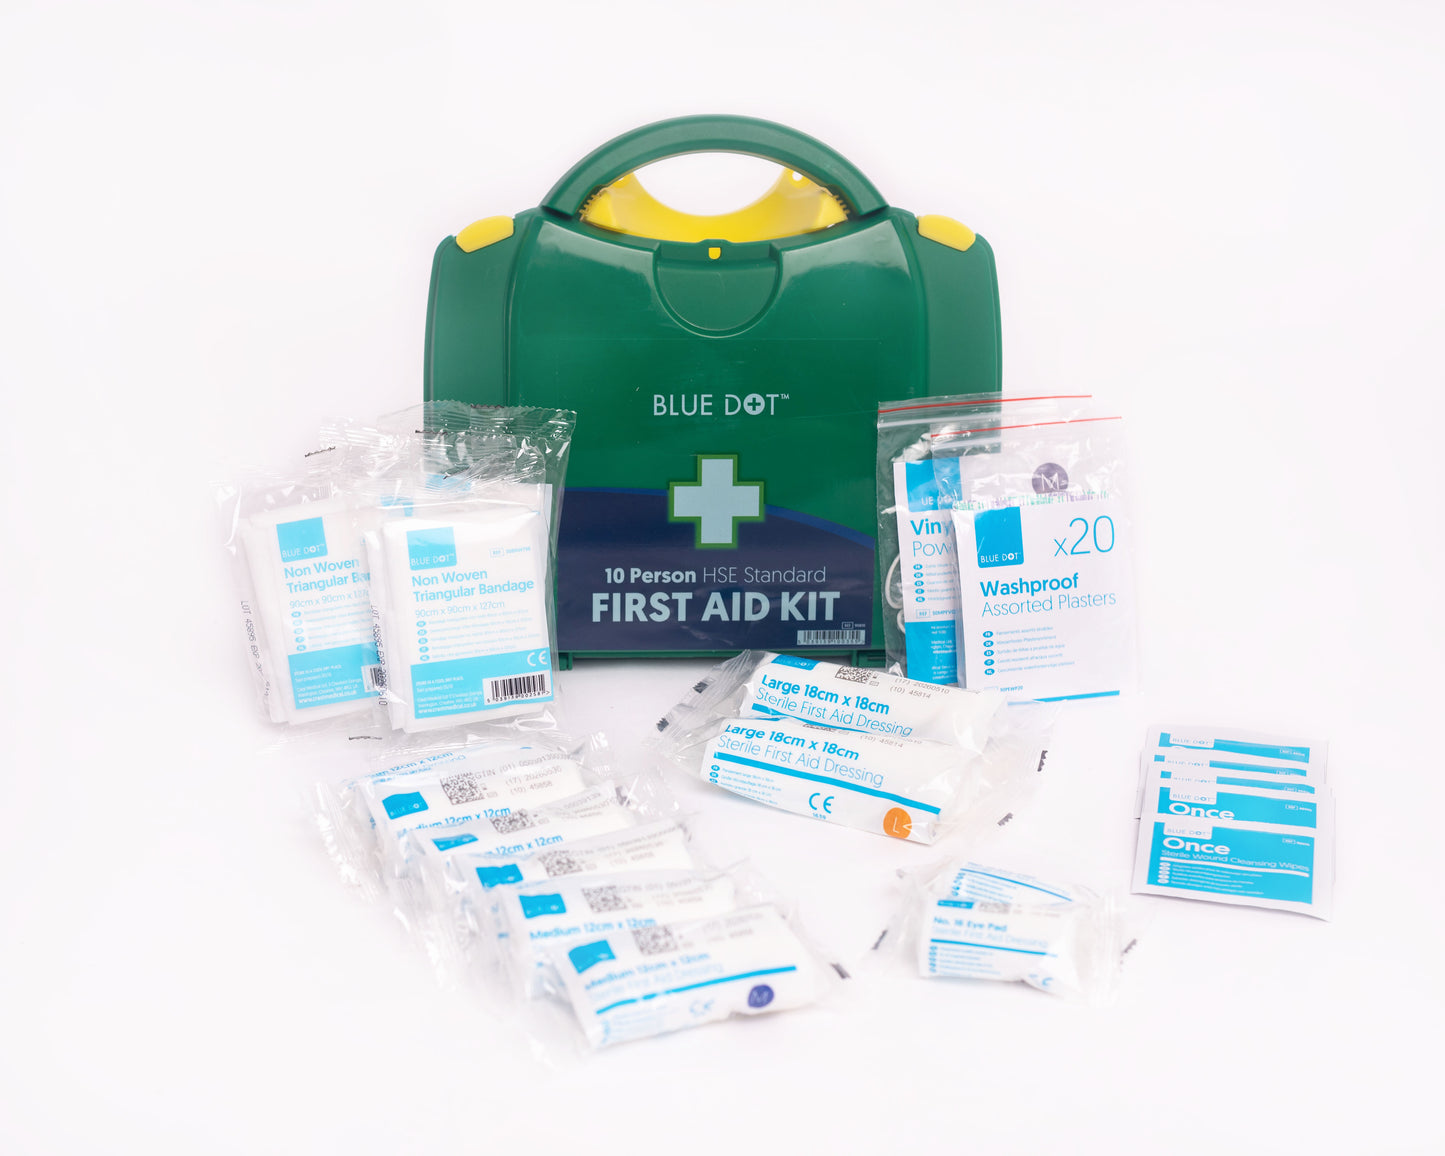 Blue Dot HSE 1-10 Person First-Aid Kit Complete